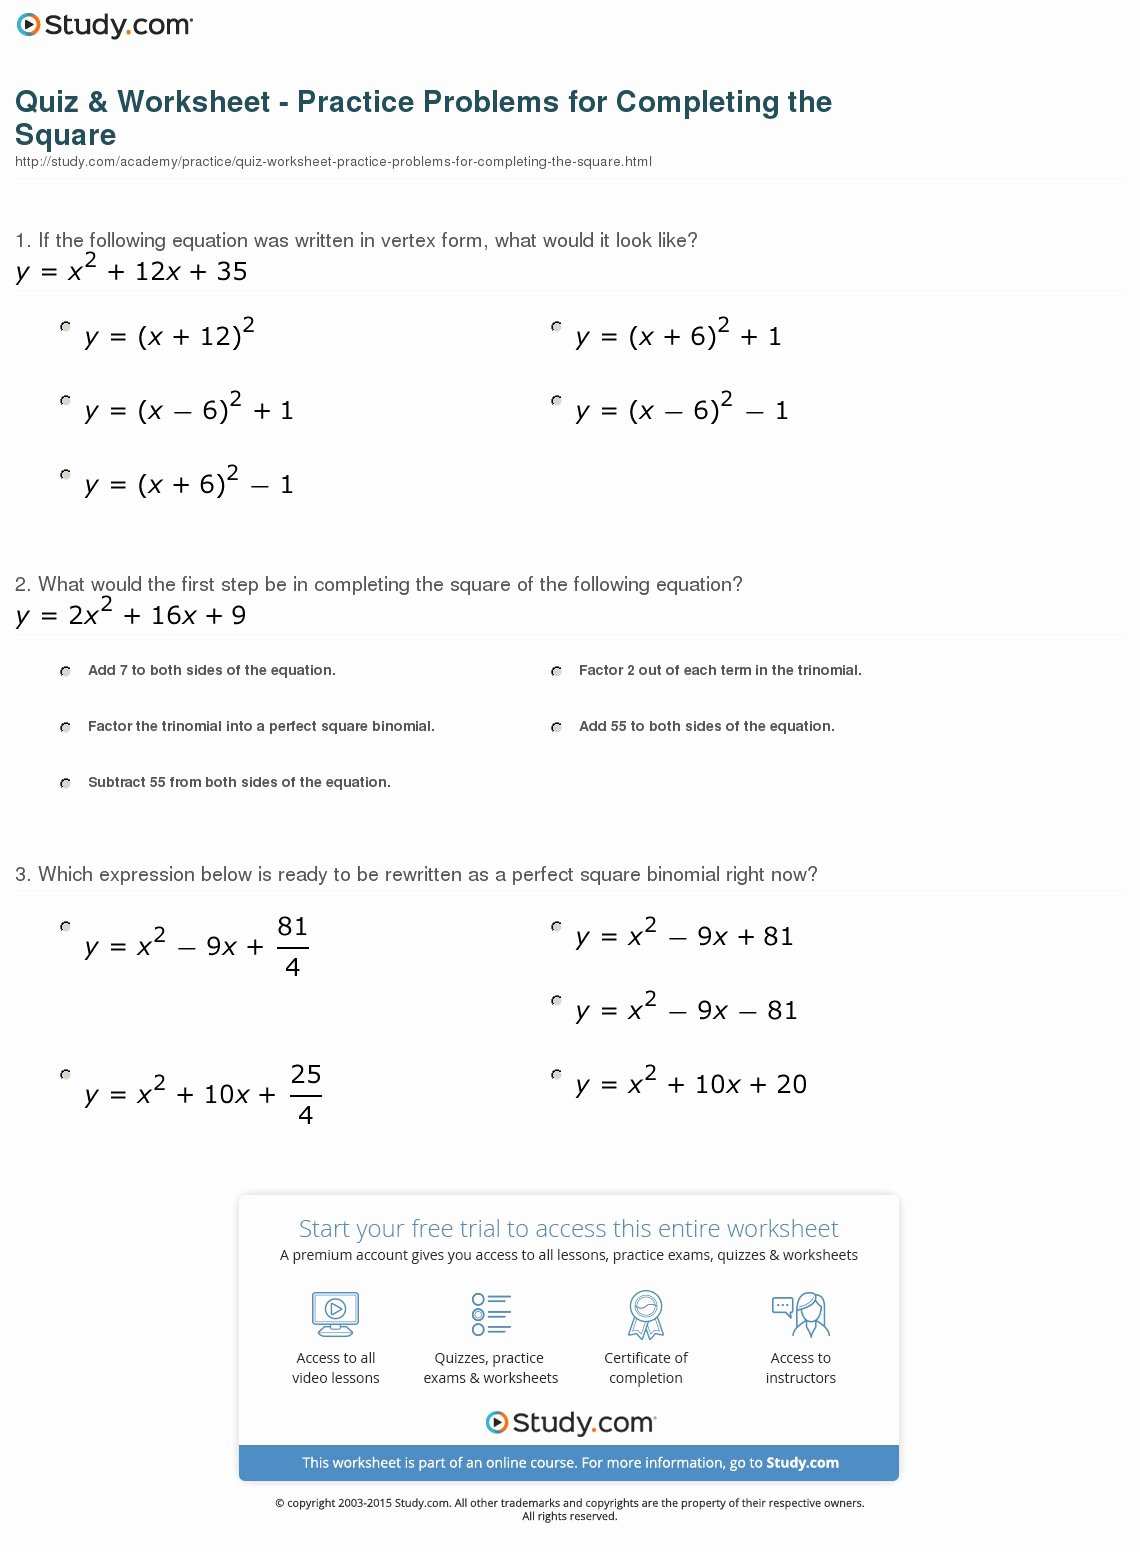 quiz worksheet practice problems for pleting the square